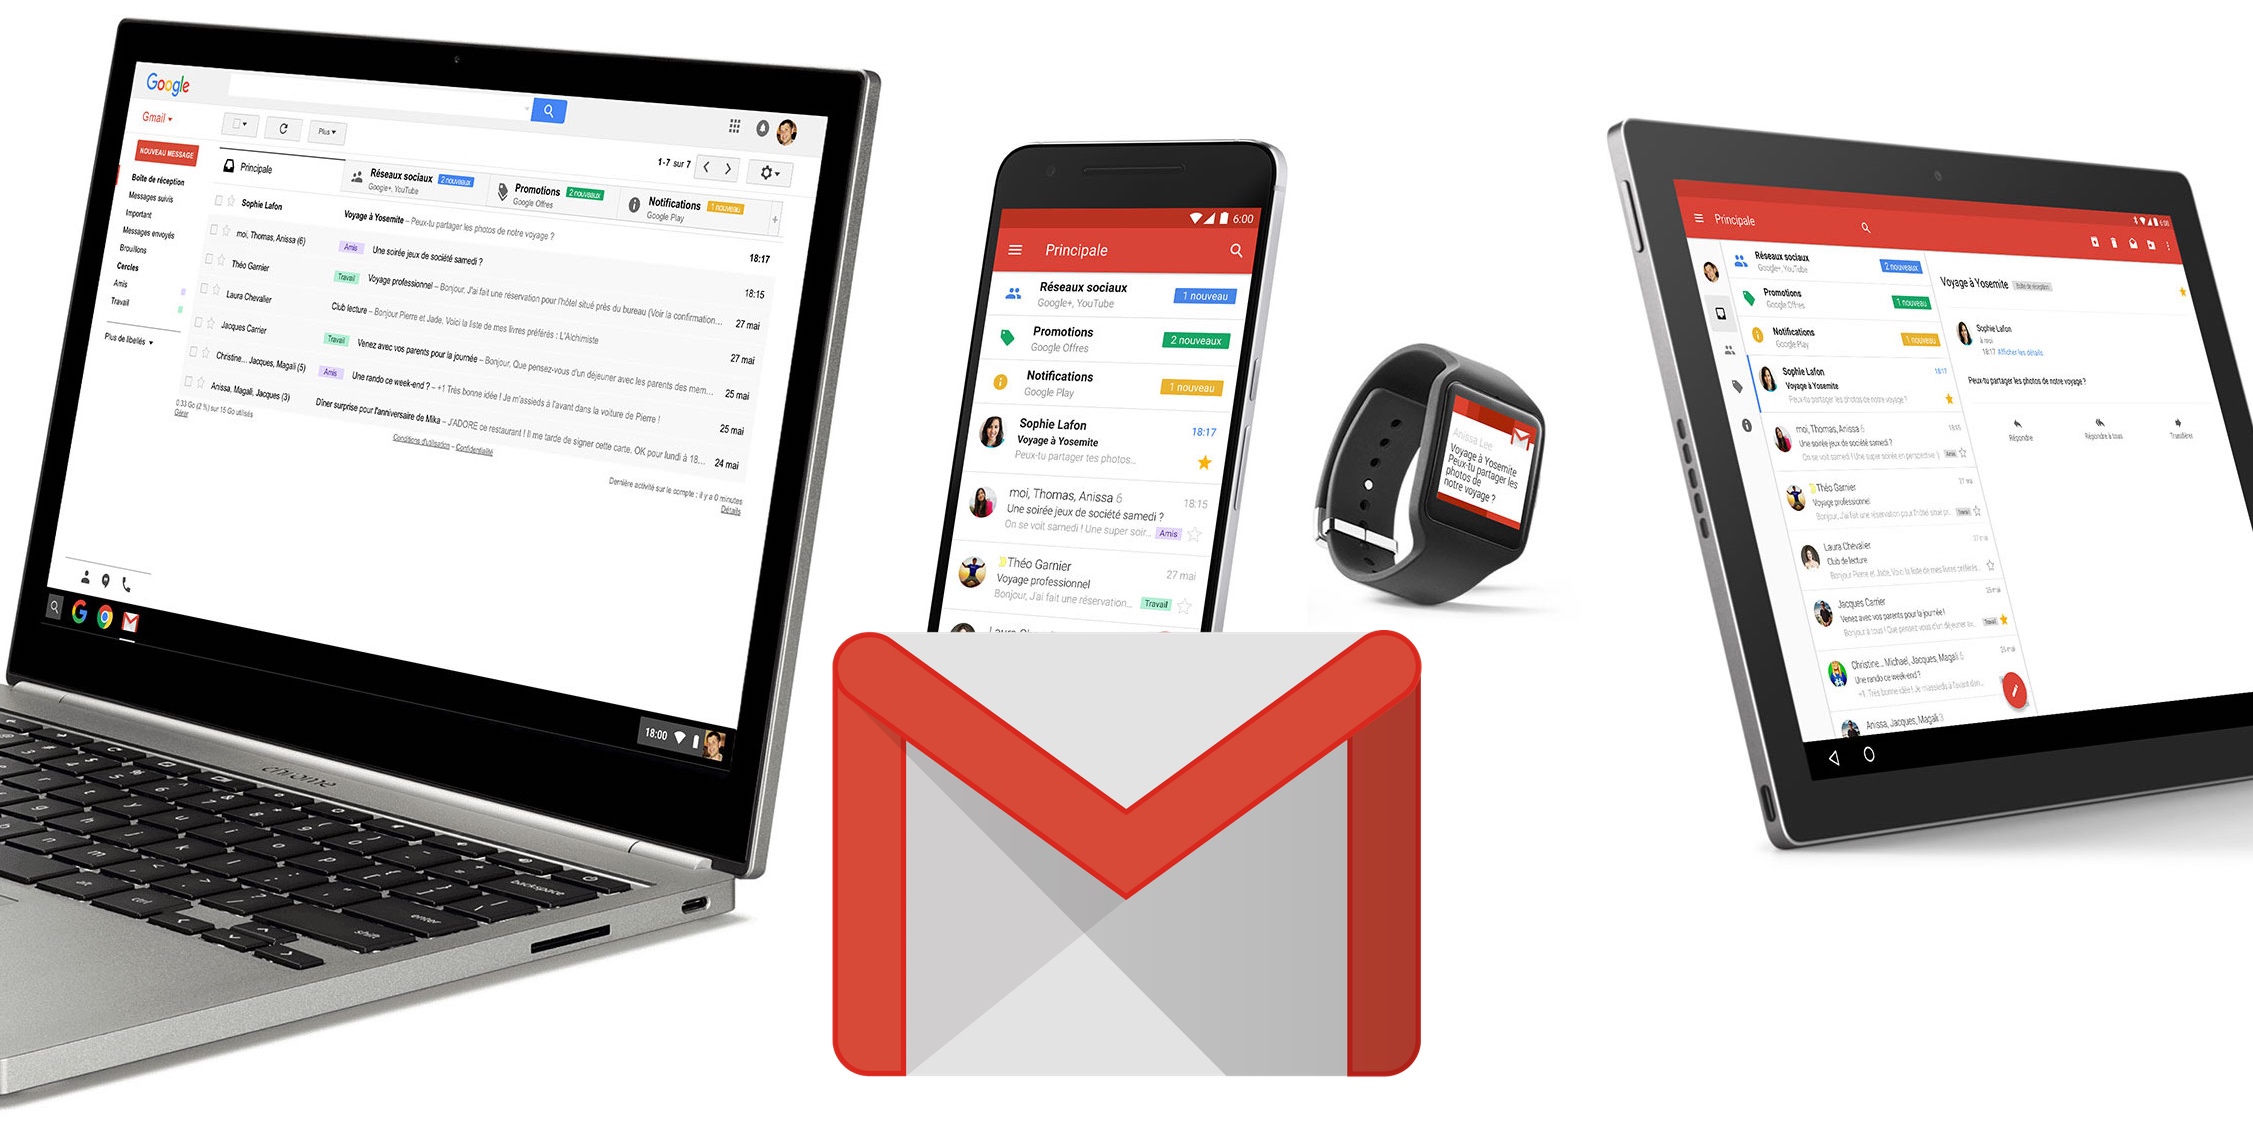 email archiver pro for gmail